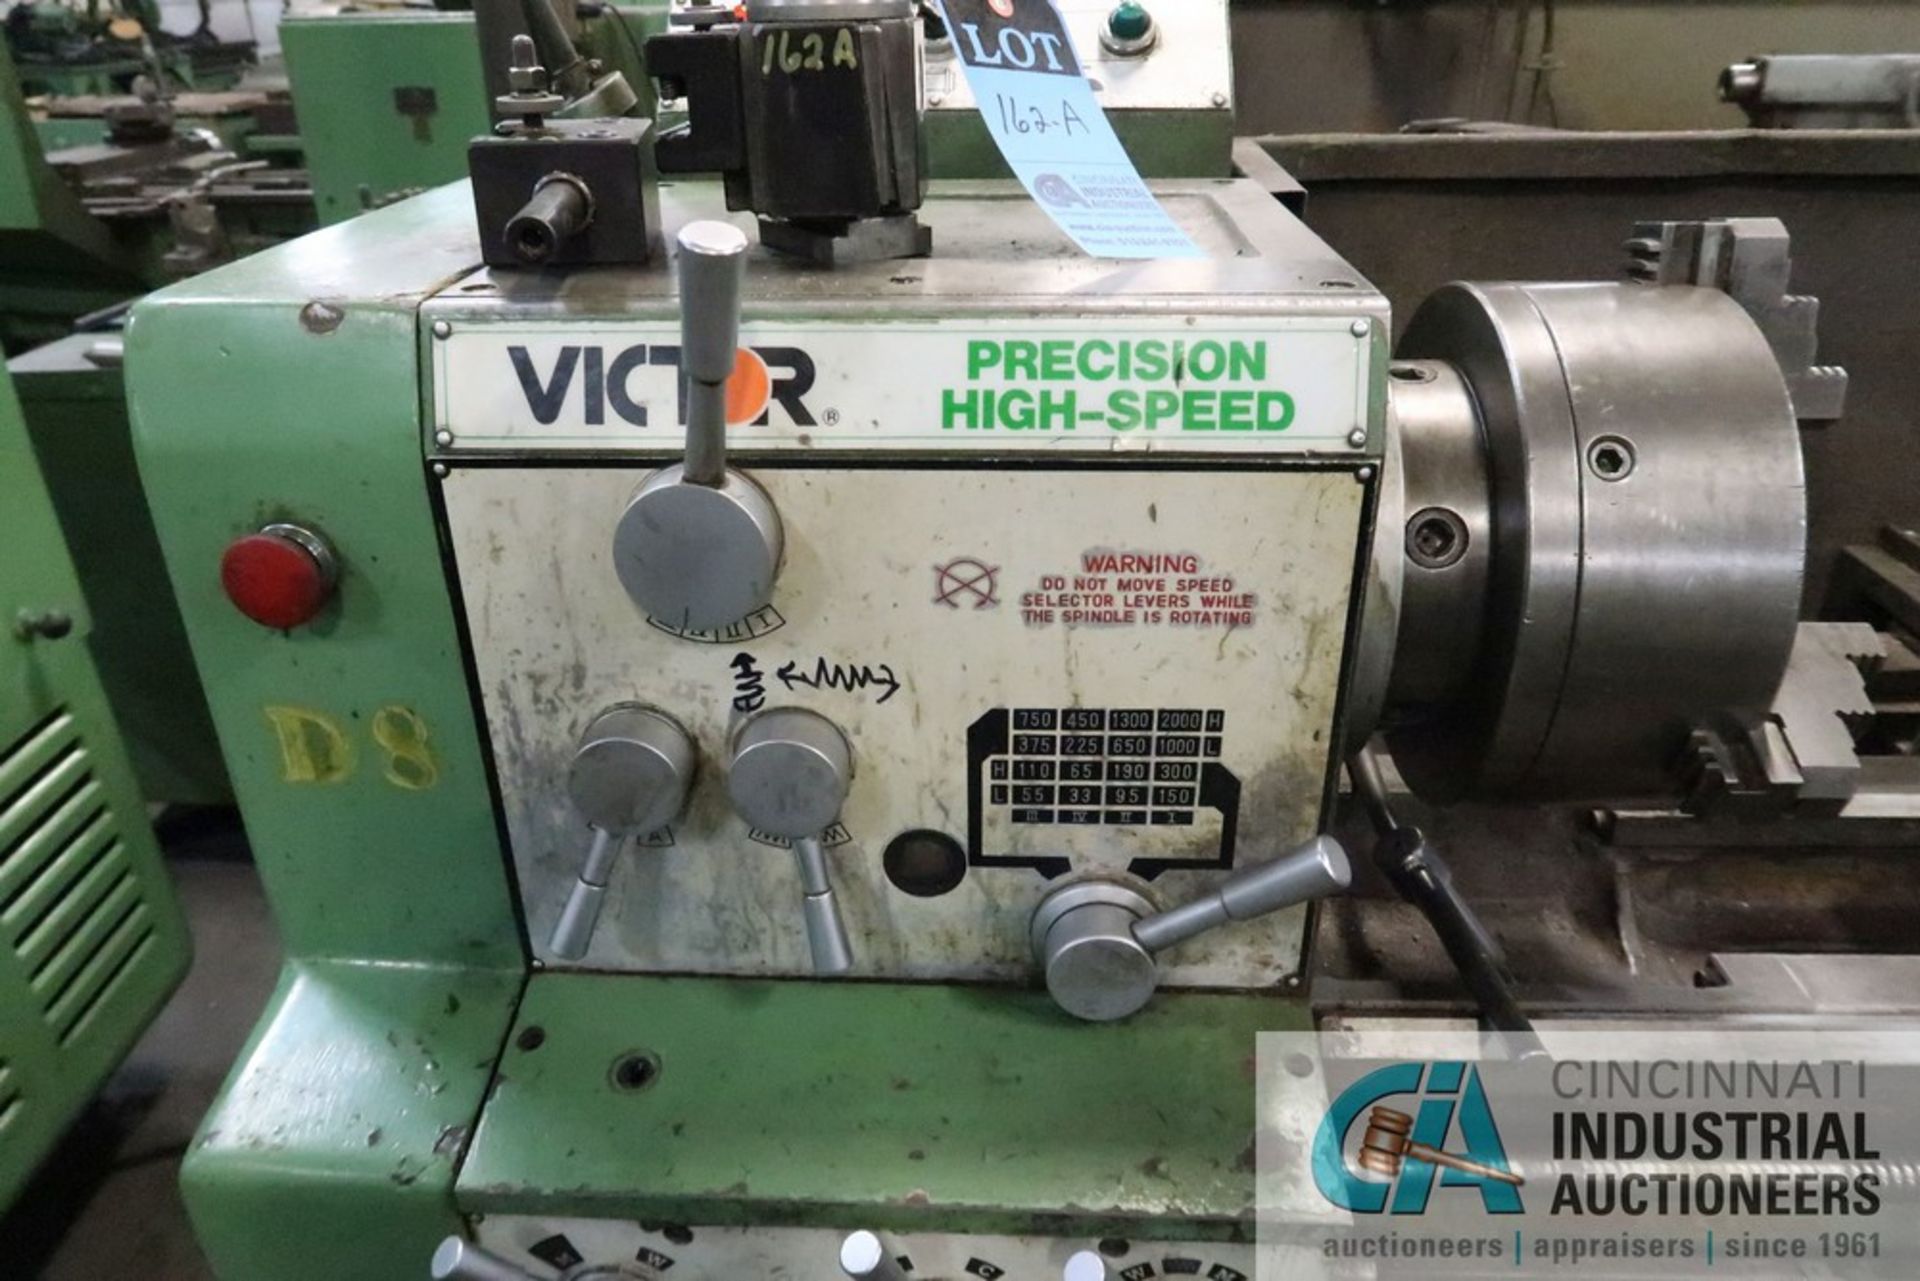 16" X 40" VICTOR MODEL 1640B PRECISION HIGH SPEED LATHE, 10" 3-JAW CHUCK, STEADY REST, TAILSTOCK, - Image 5 of 12